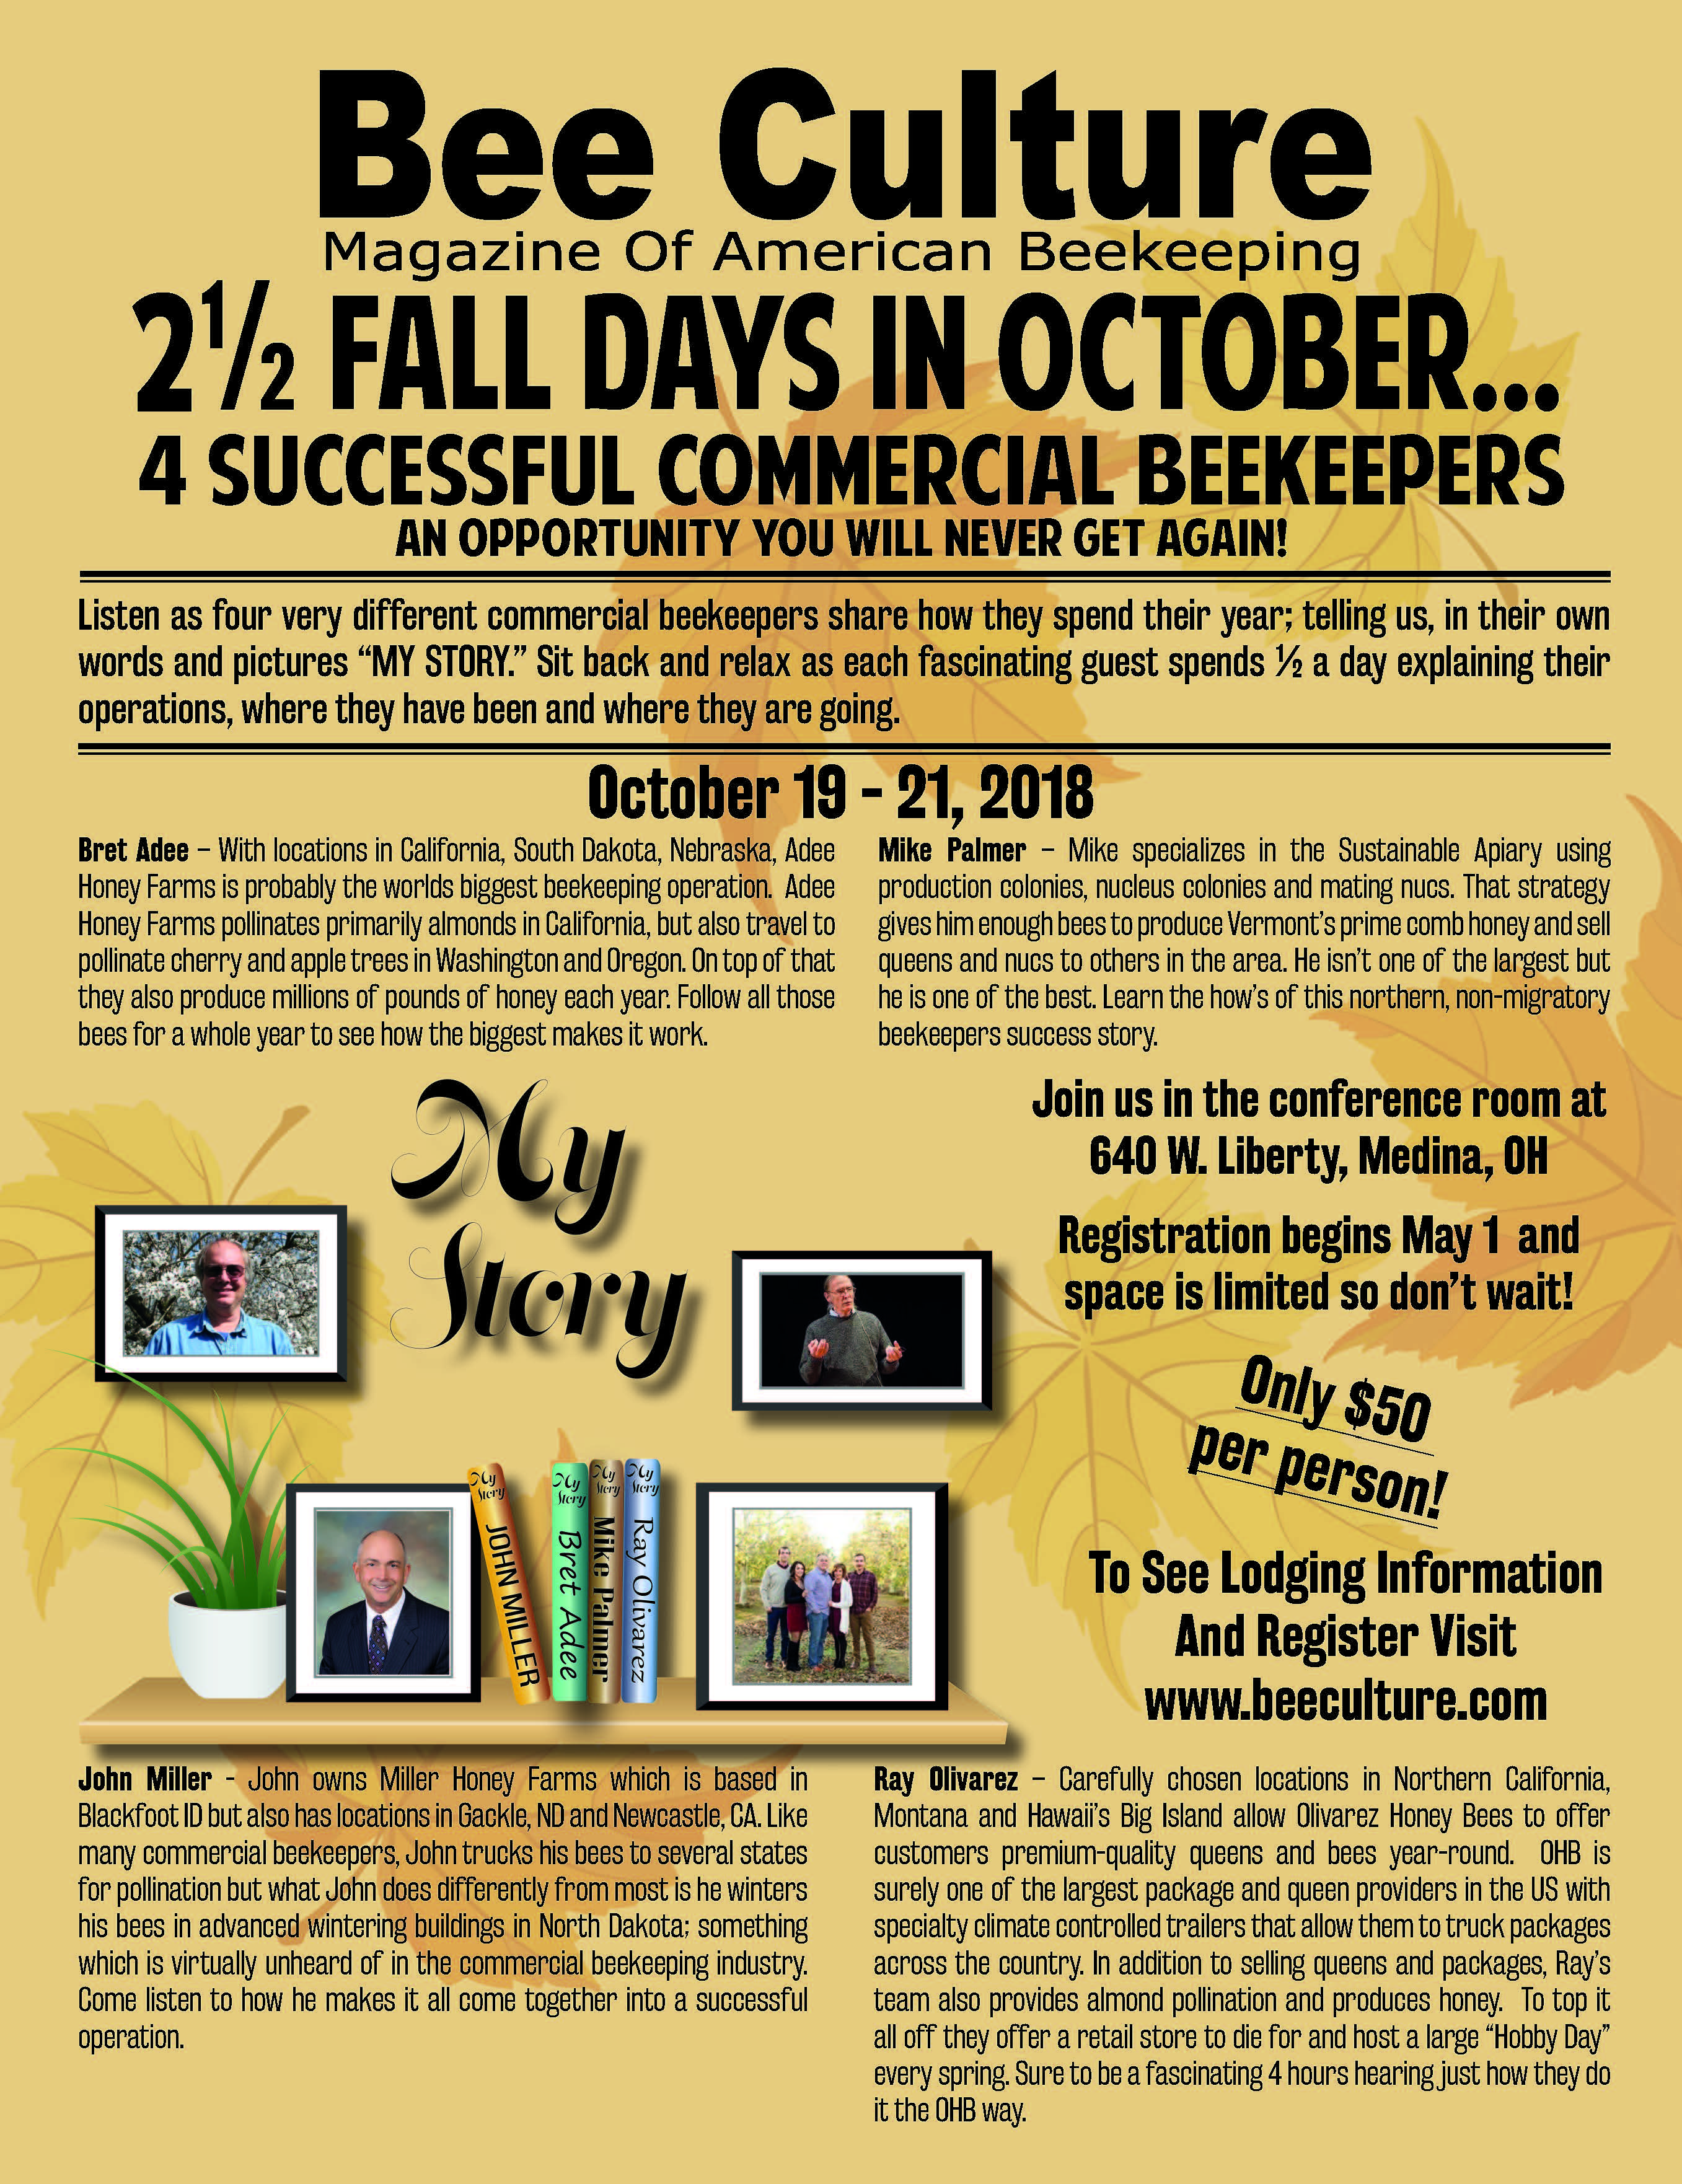 BEE CULTURE’S OCTOBER EVENT – MY STORY